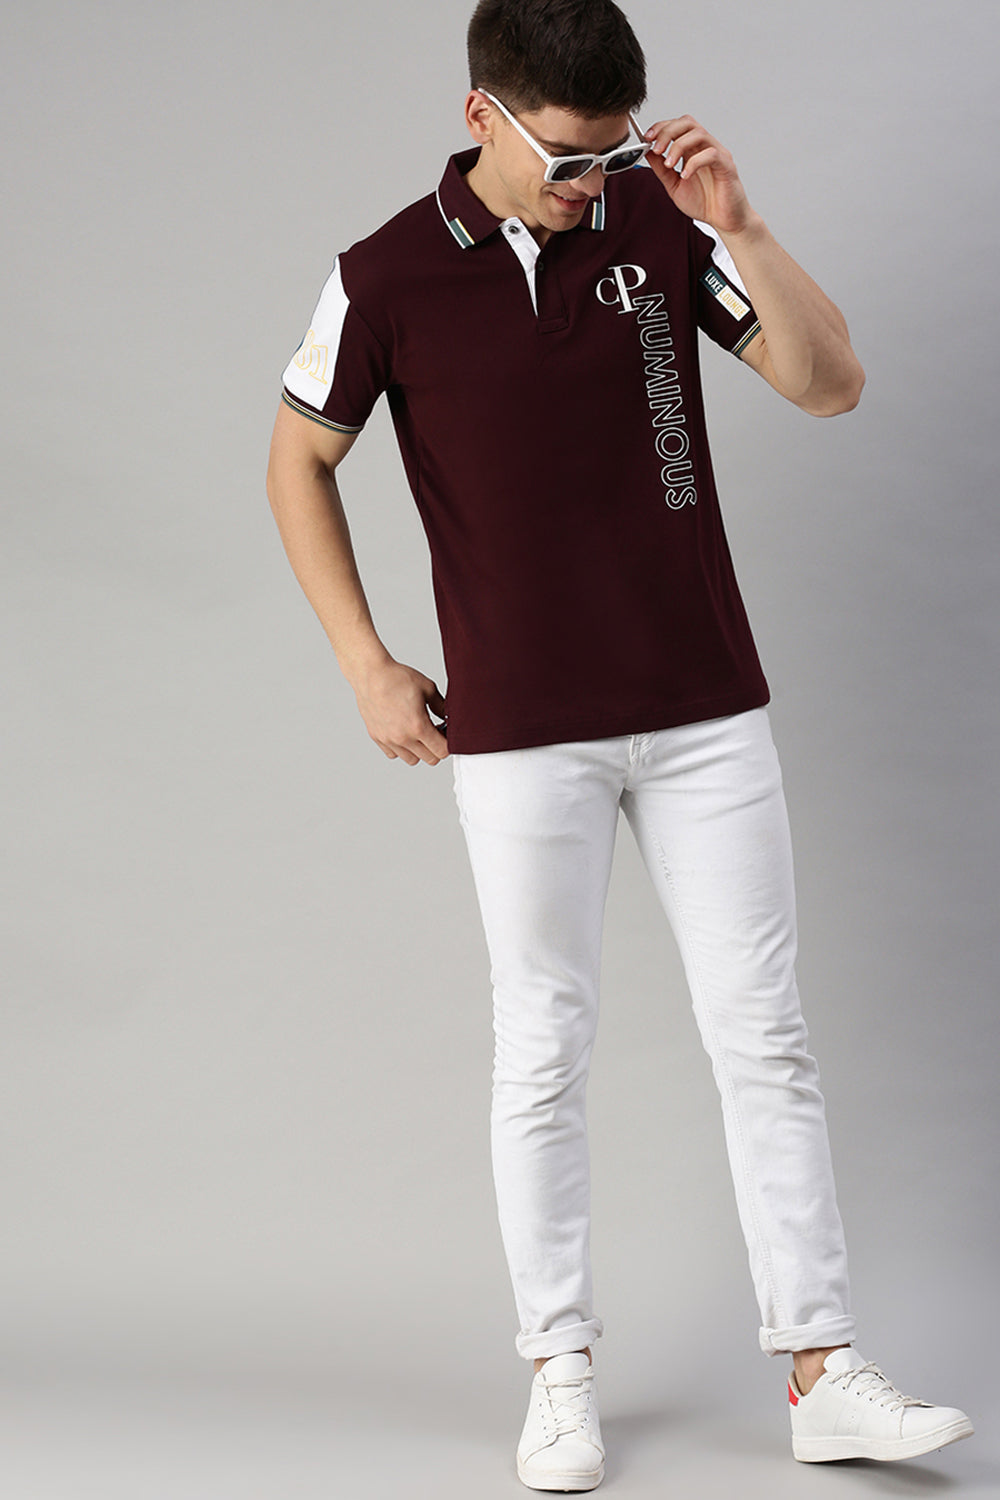 Classic Polo Men's Cotton Half Sleeve Printed Slim Fit Polo Neck Maroon Color T-Shirt | Prm - 761 B